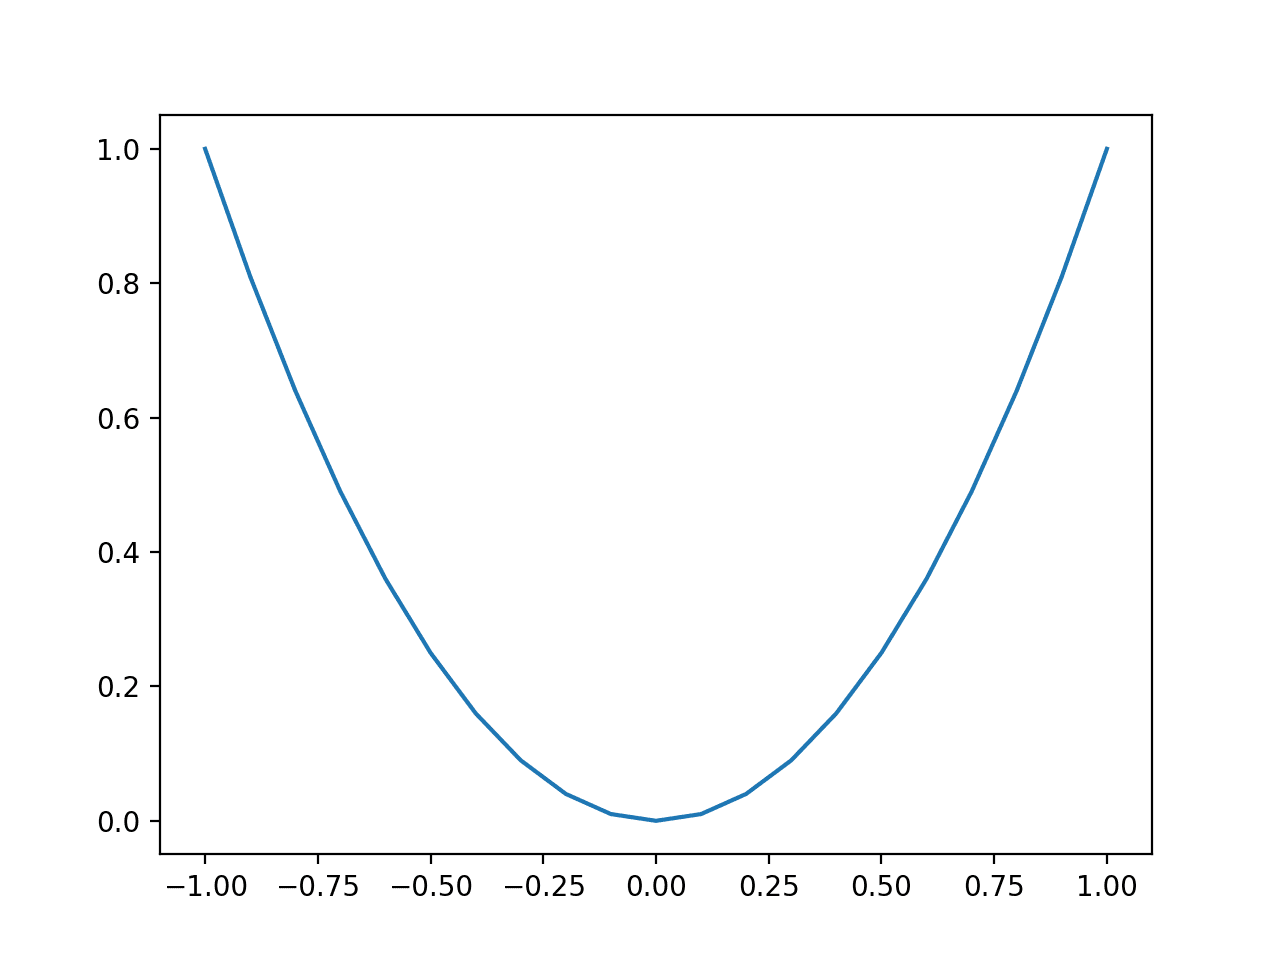 Line Plot of Simple One-Dimensional Function